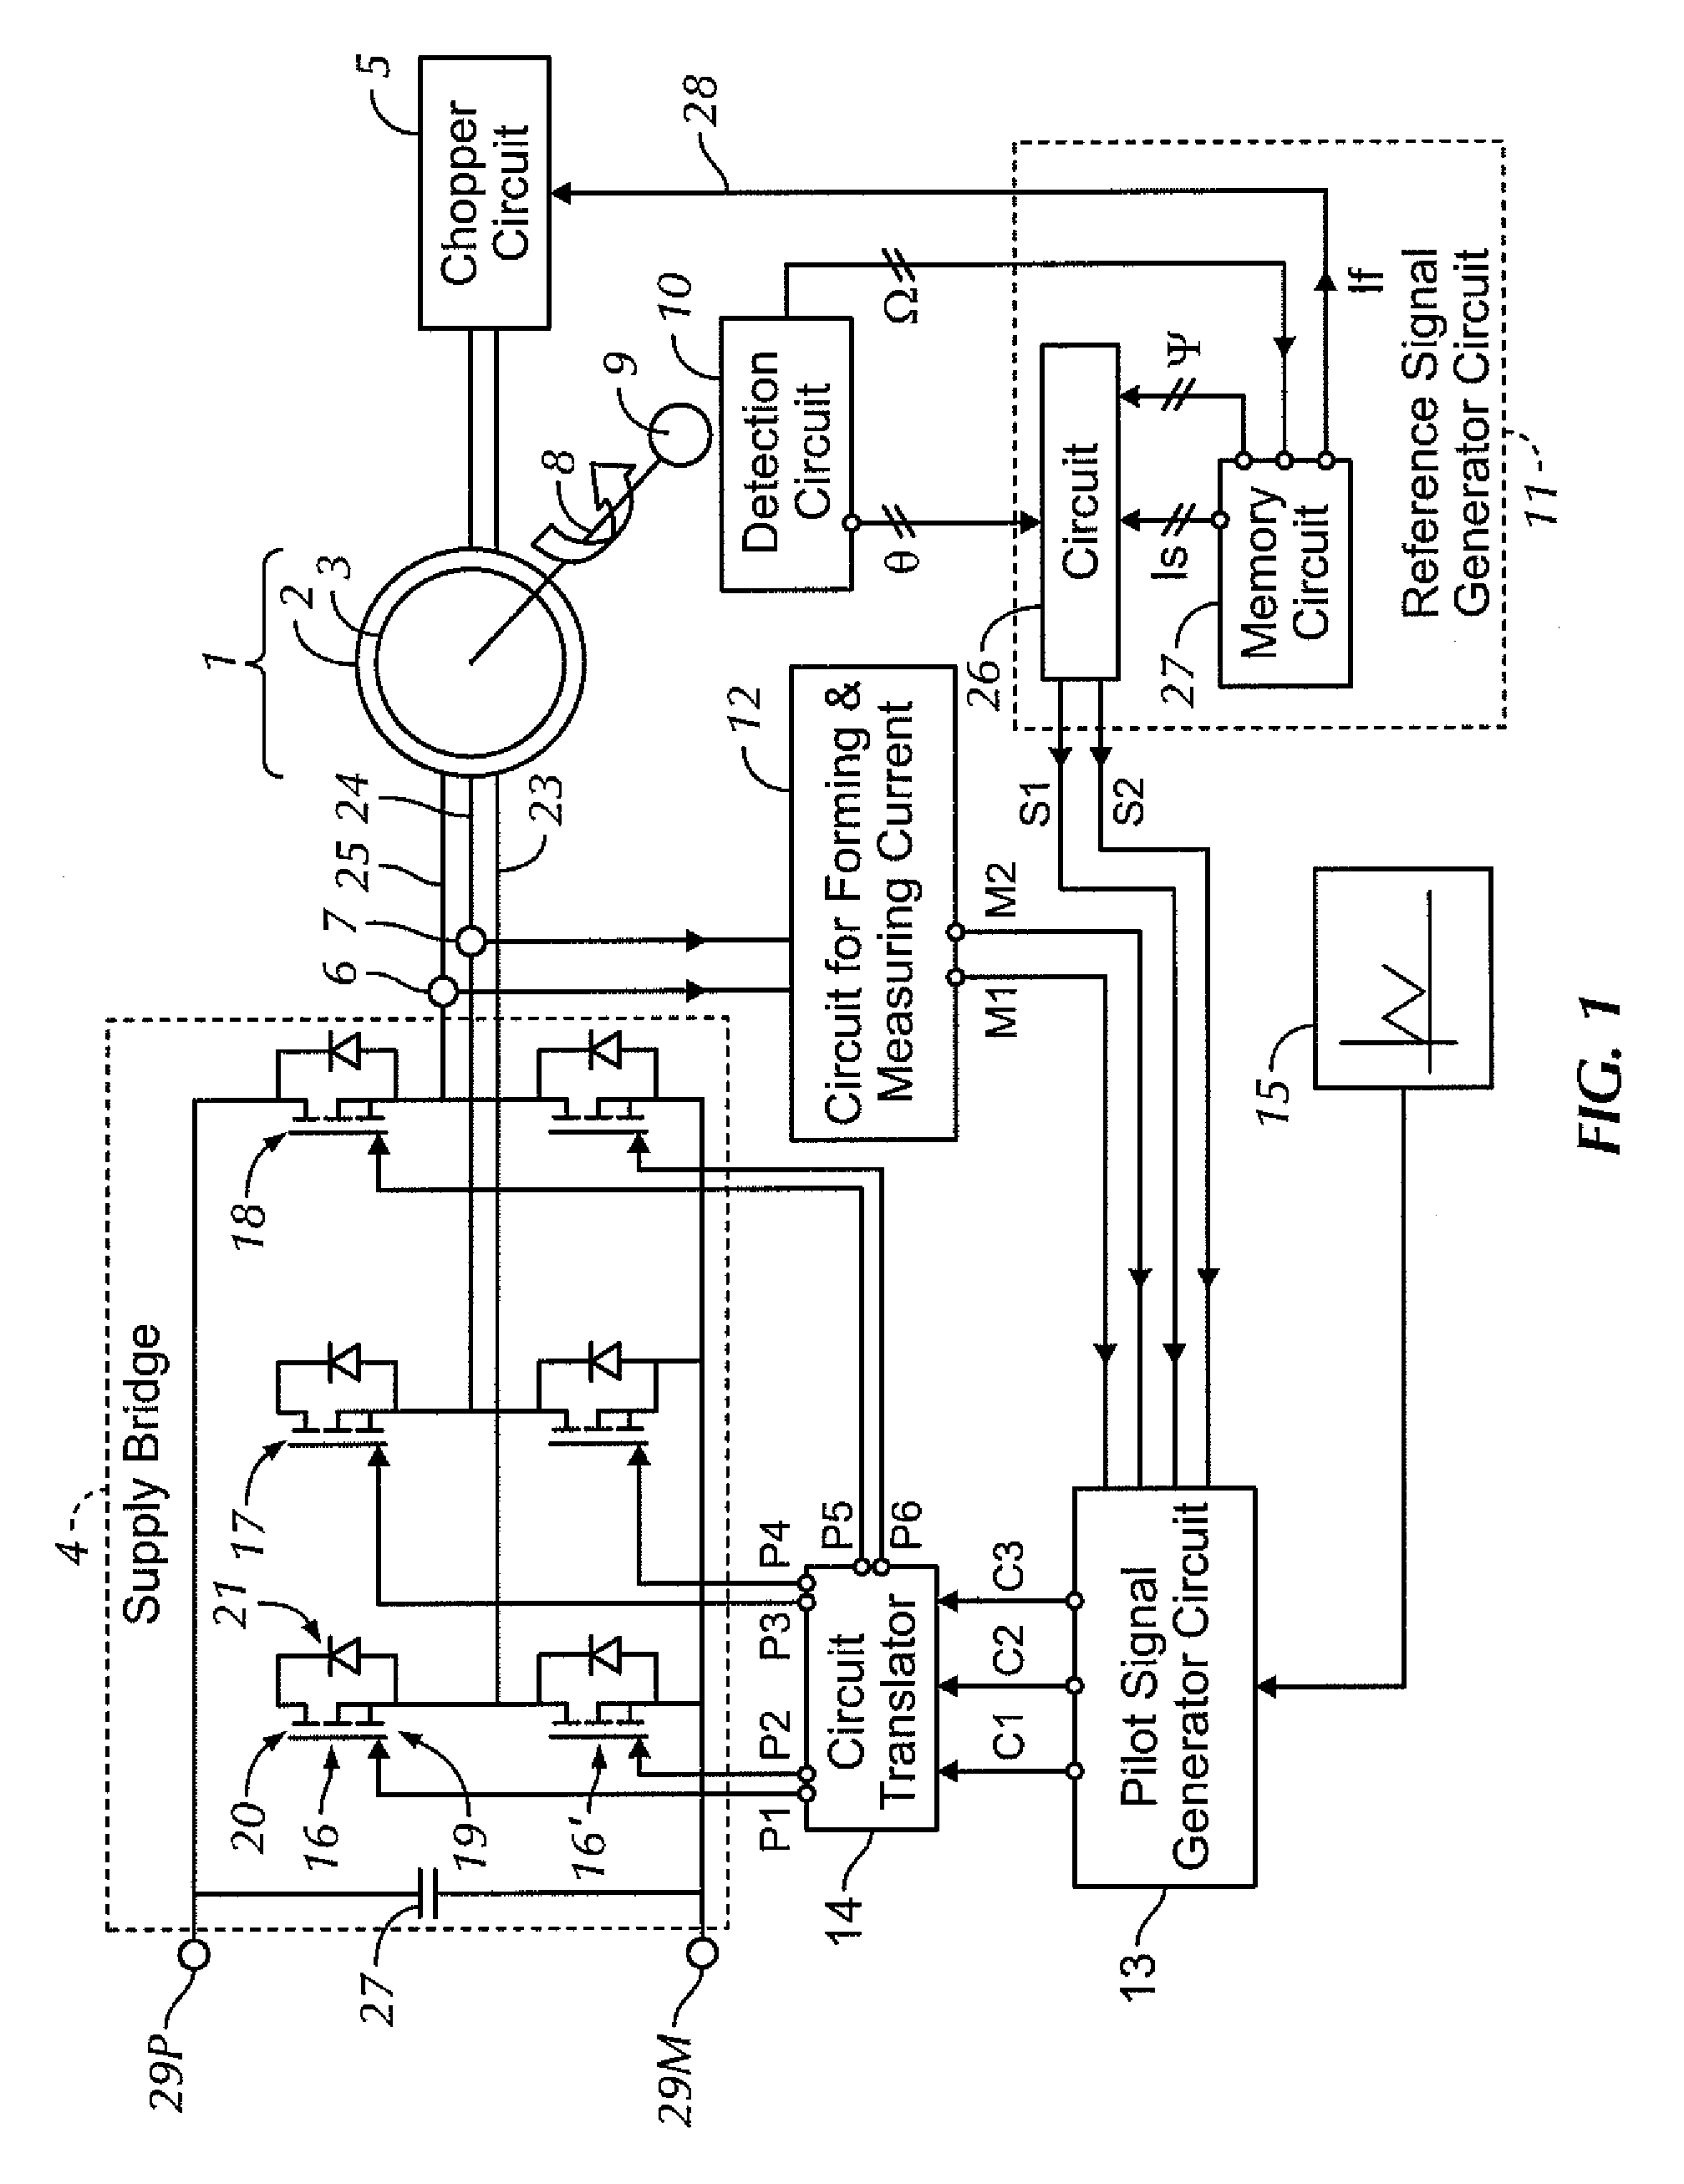 Pulse width modulation control circuit for a multimode electrical machine, and a multimode electrical machine equipped with such a control circuit